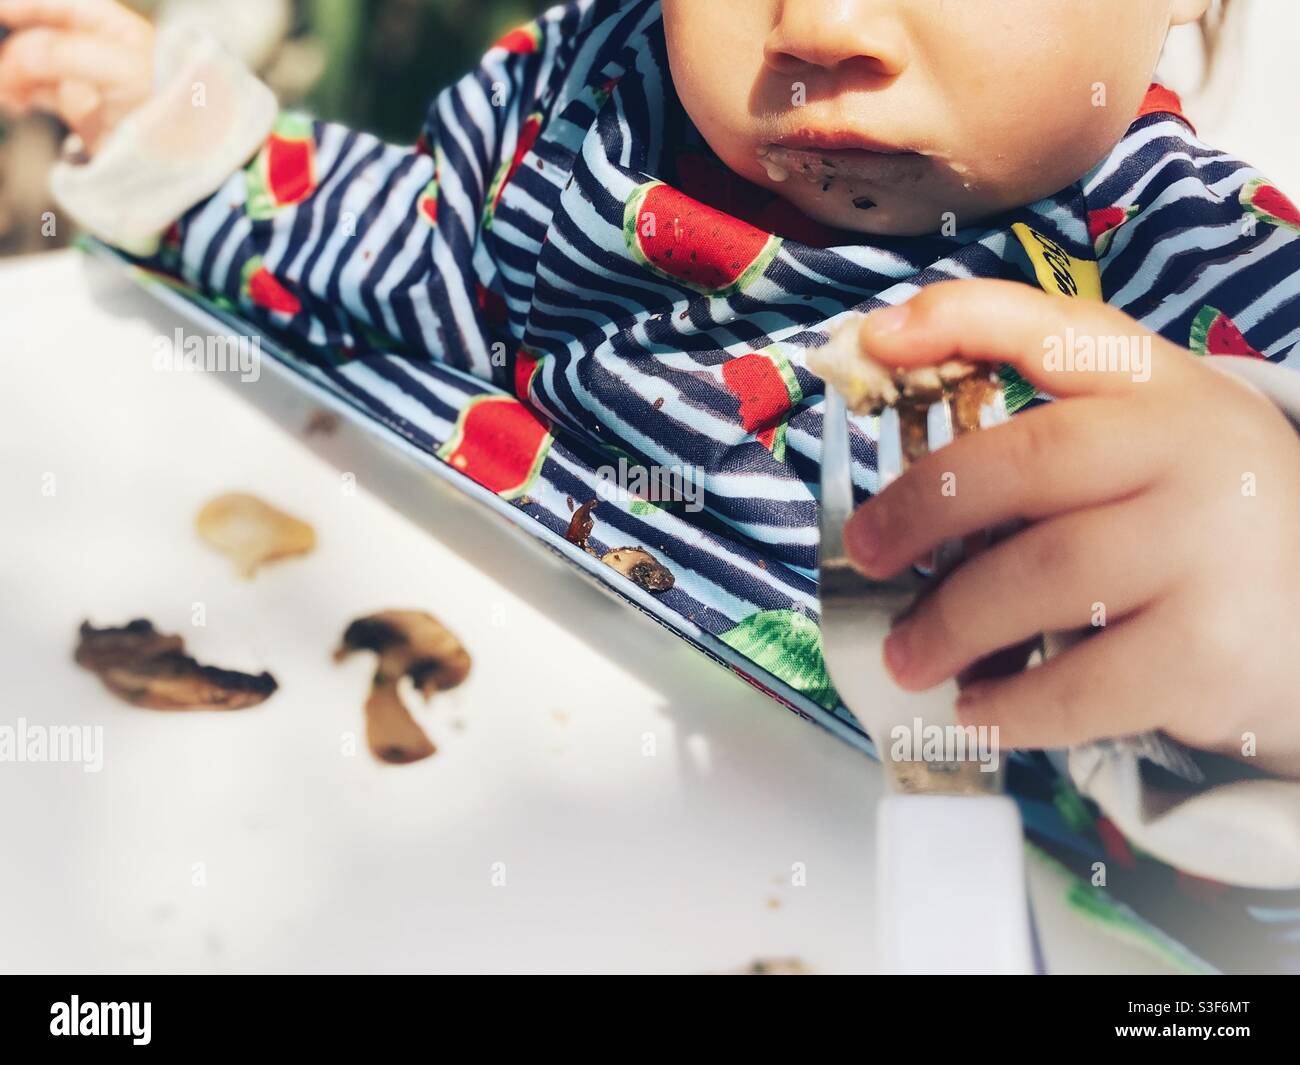 Baby/ infant/ toddler/ child eating cooked mushrooms in a high chair holding a child’s fork Stock Photo